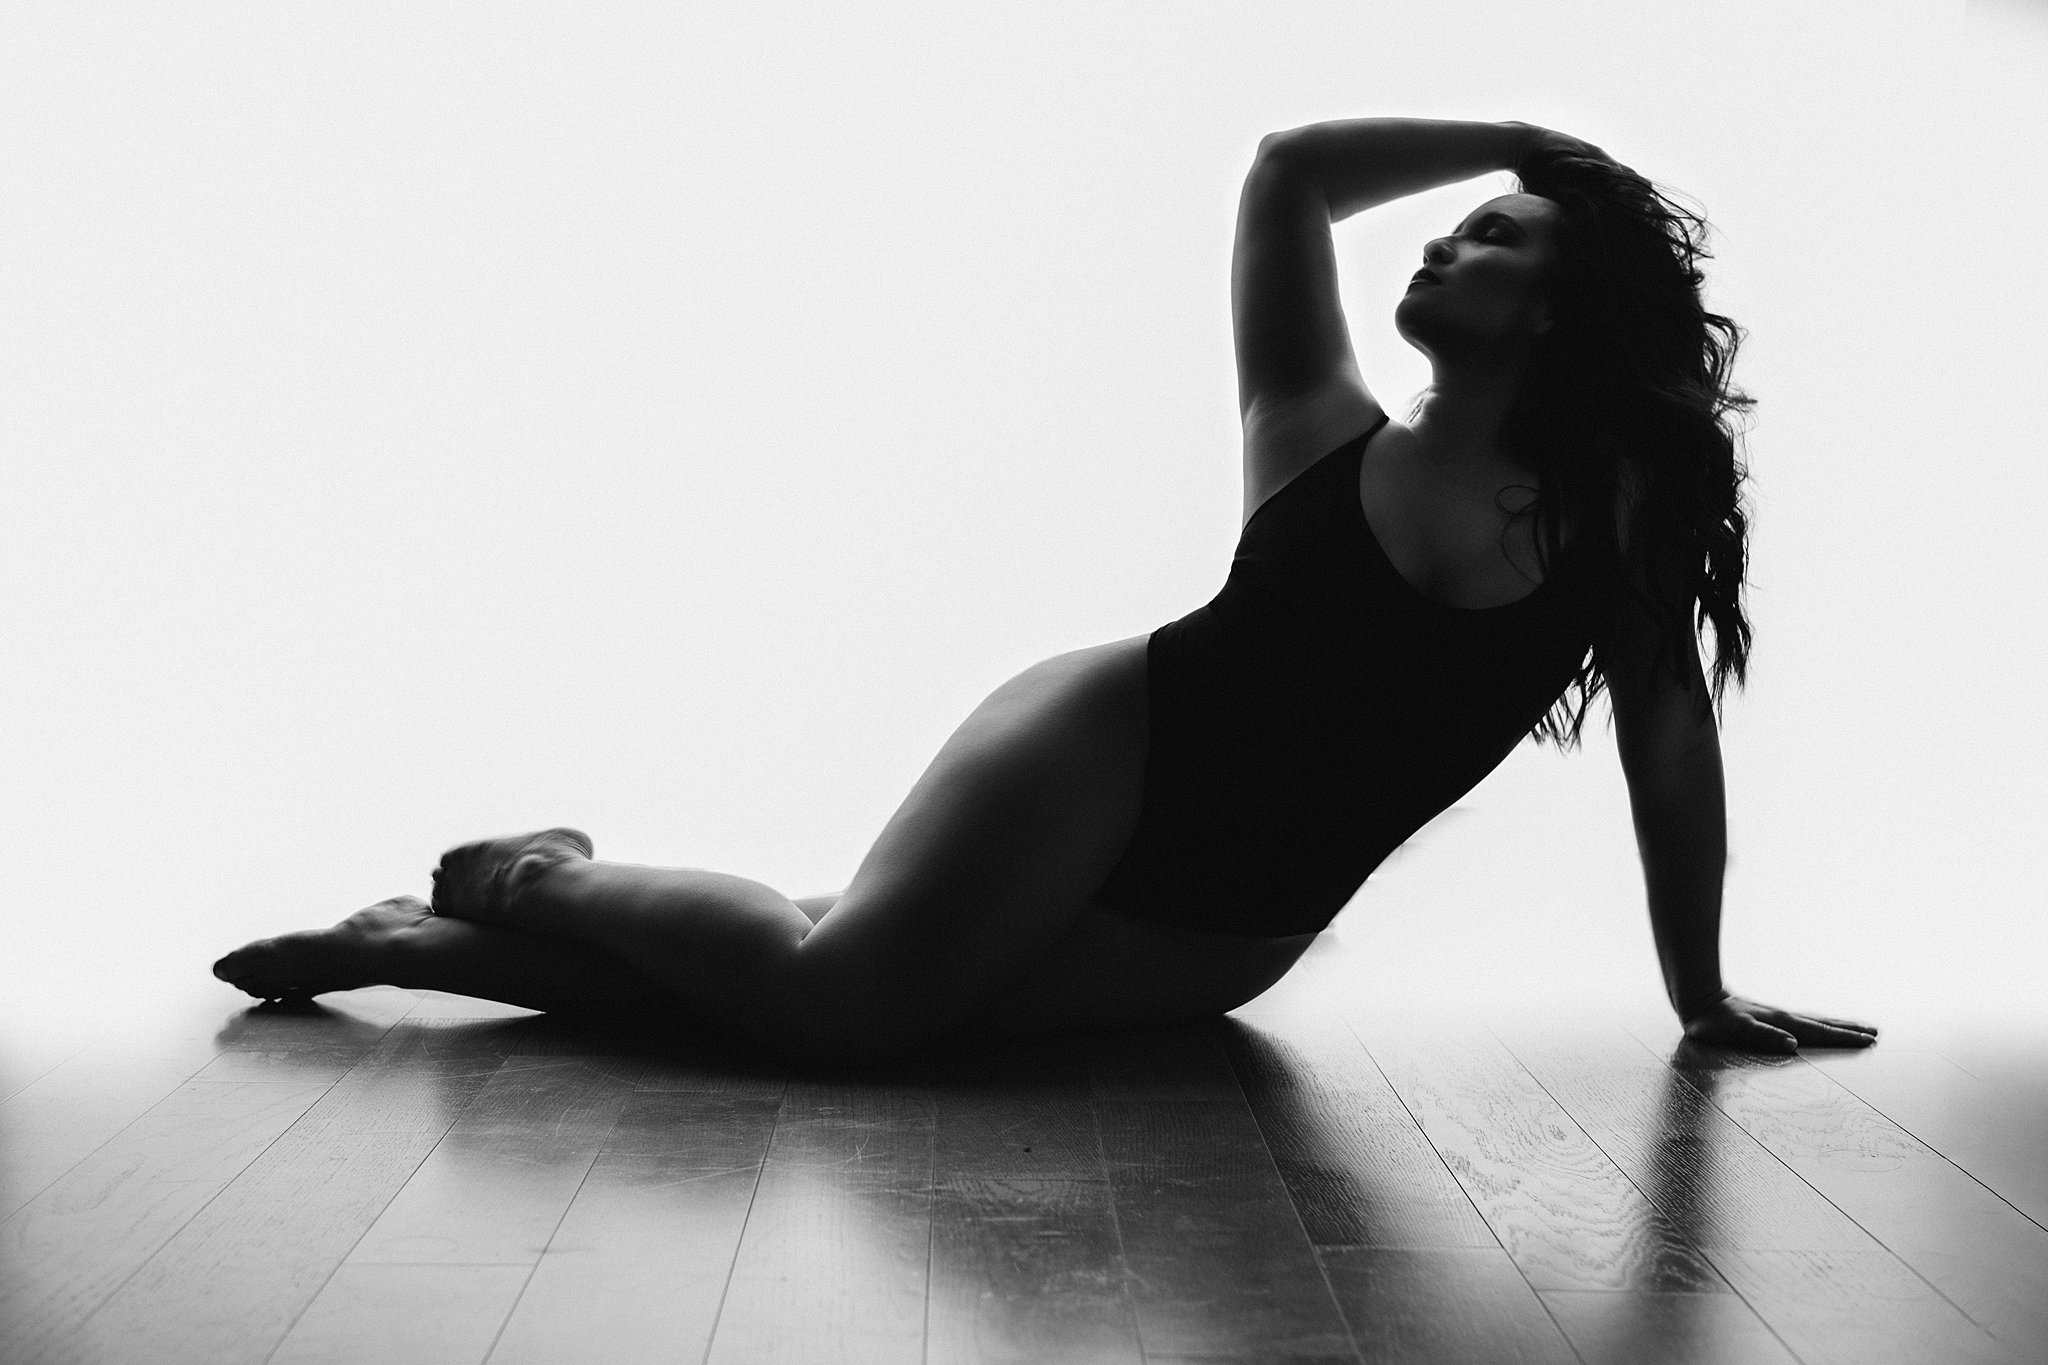 Silhouette of a woman laying on a hardwood floor in front of a window with a hand running through her hair spas in alpharetta